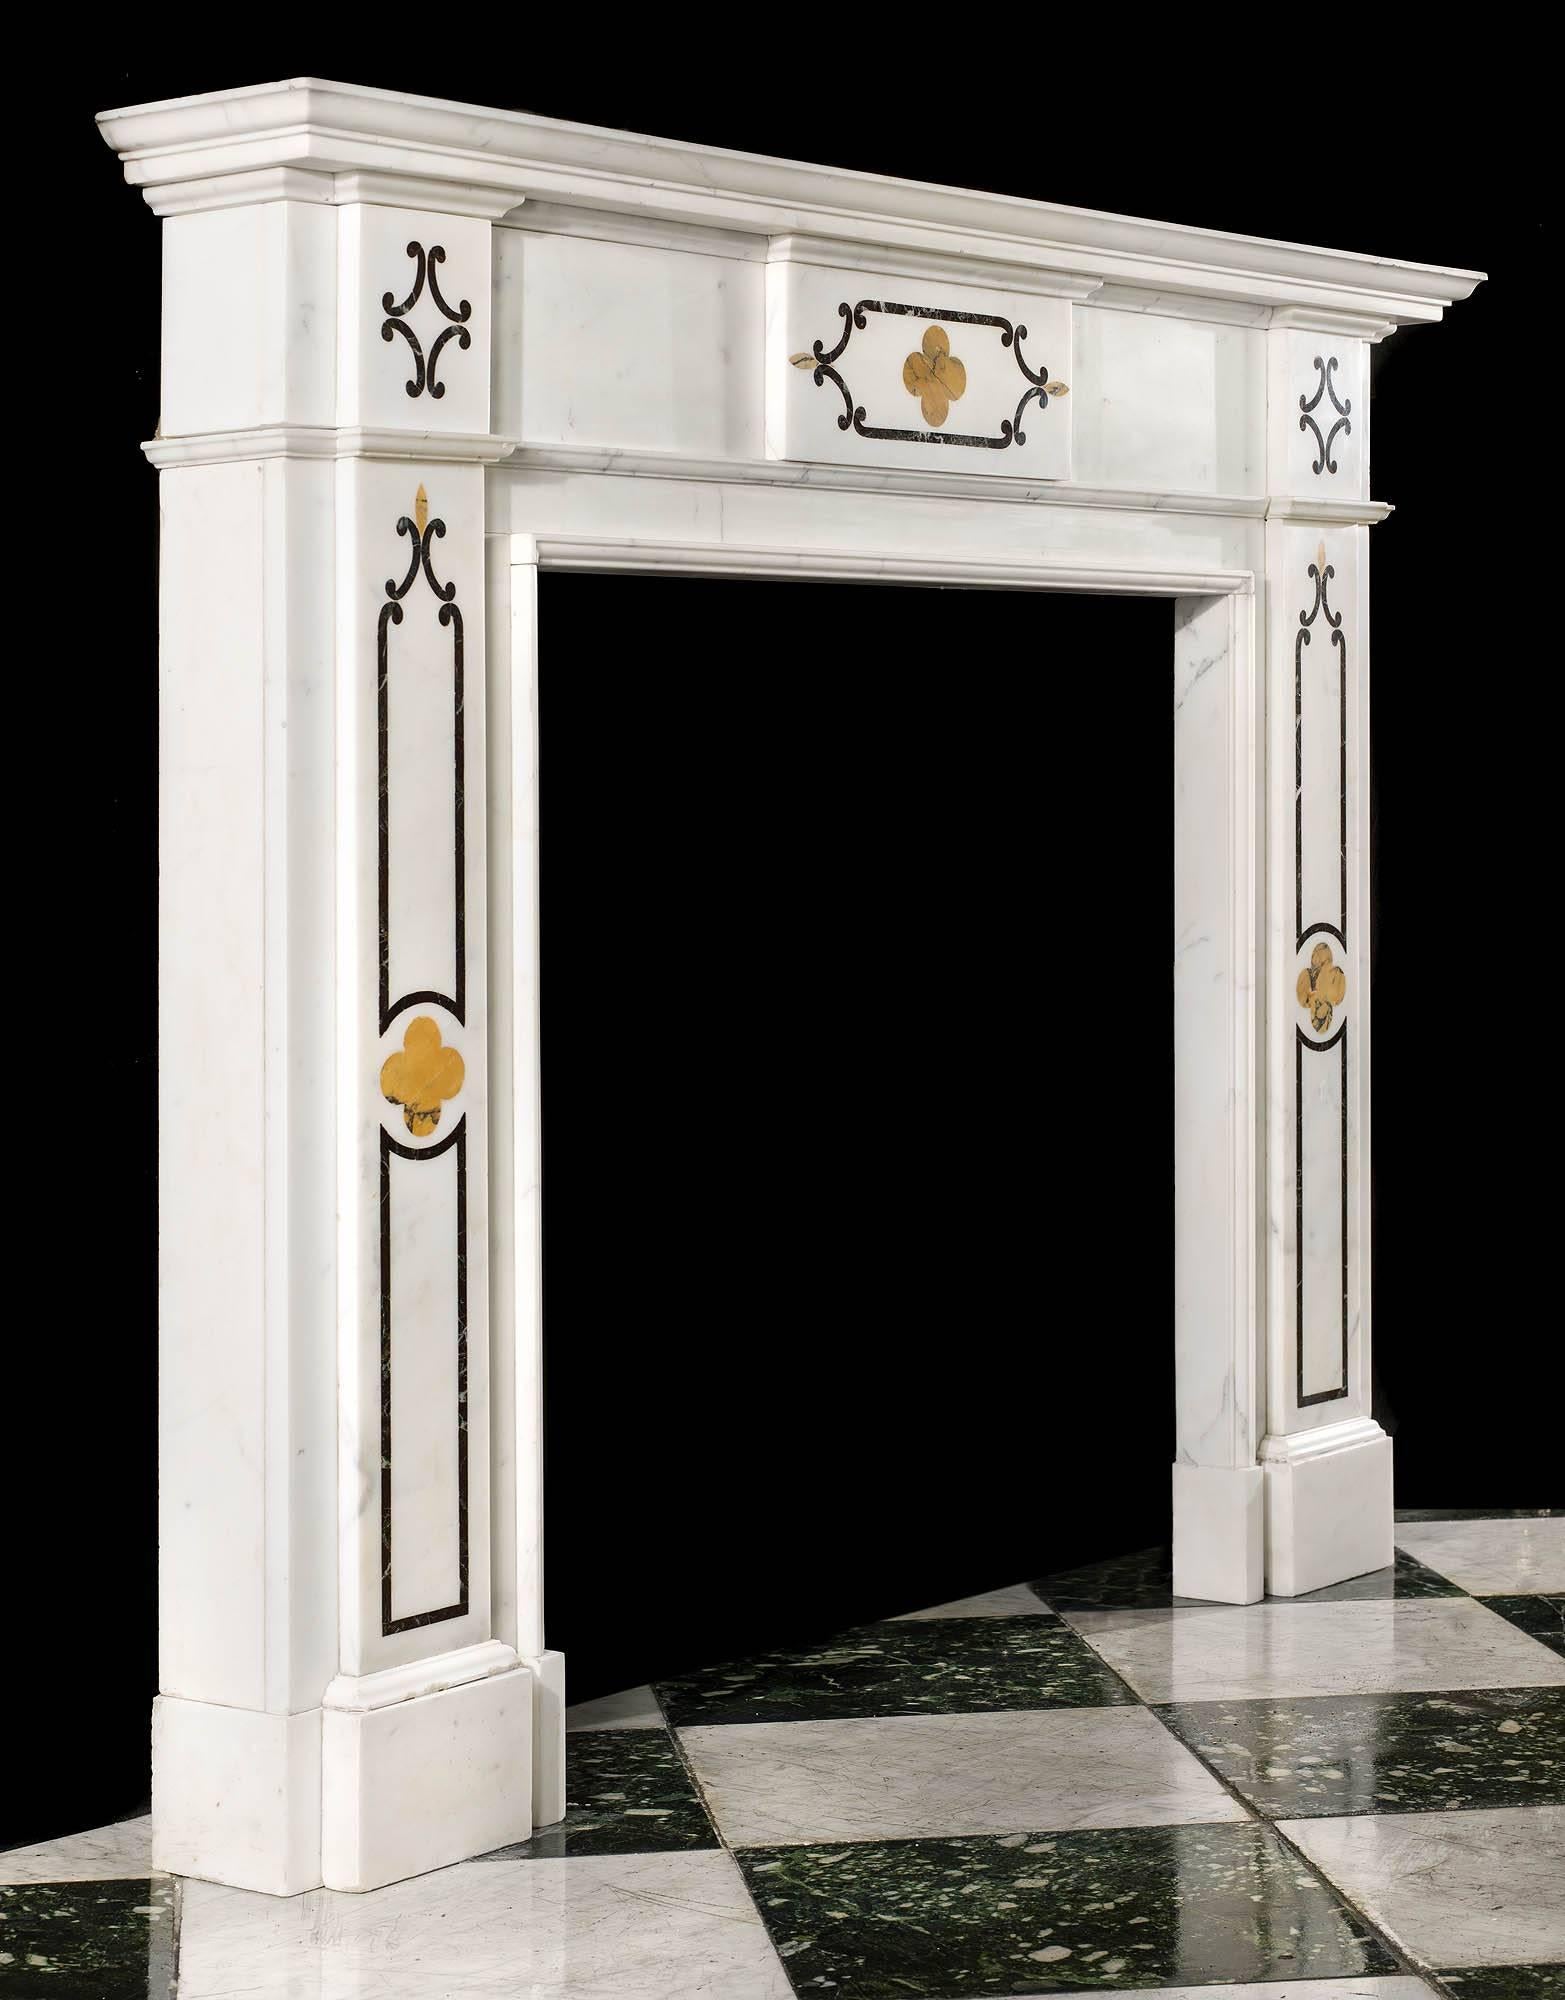 An attractive Victorian marble antique chimneypiece in pure white statuary marble, inlaid with Sienna and Verde Antico marble. The plain frieze has a central inlaid panel flanked by simple end blocks. The jambs have further inlaid Gothic style